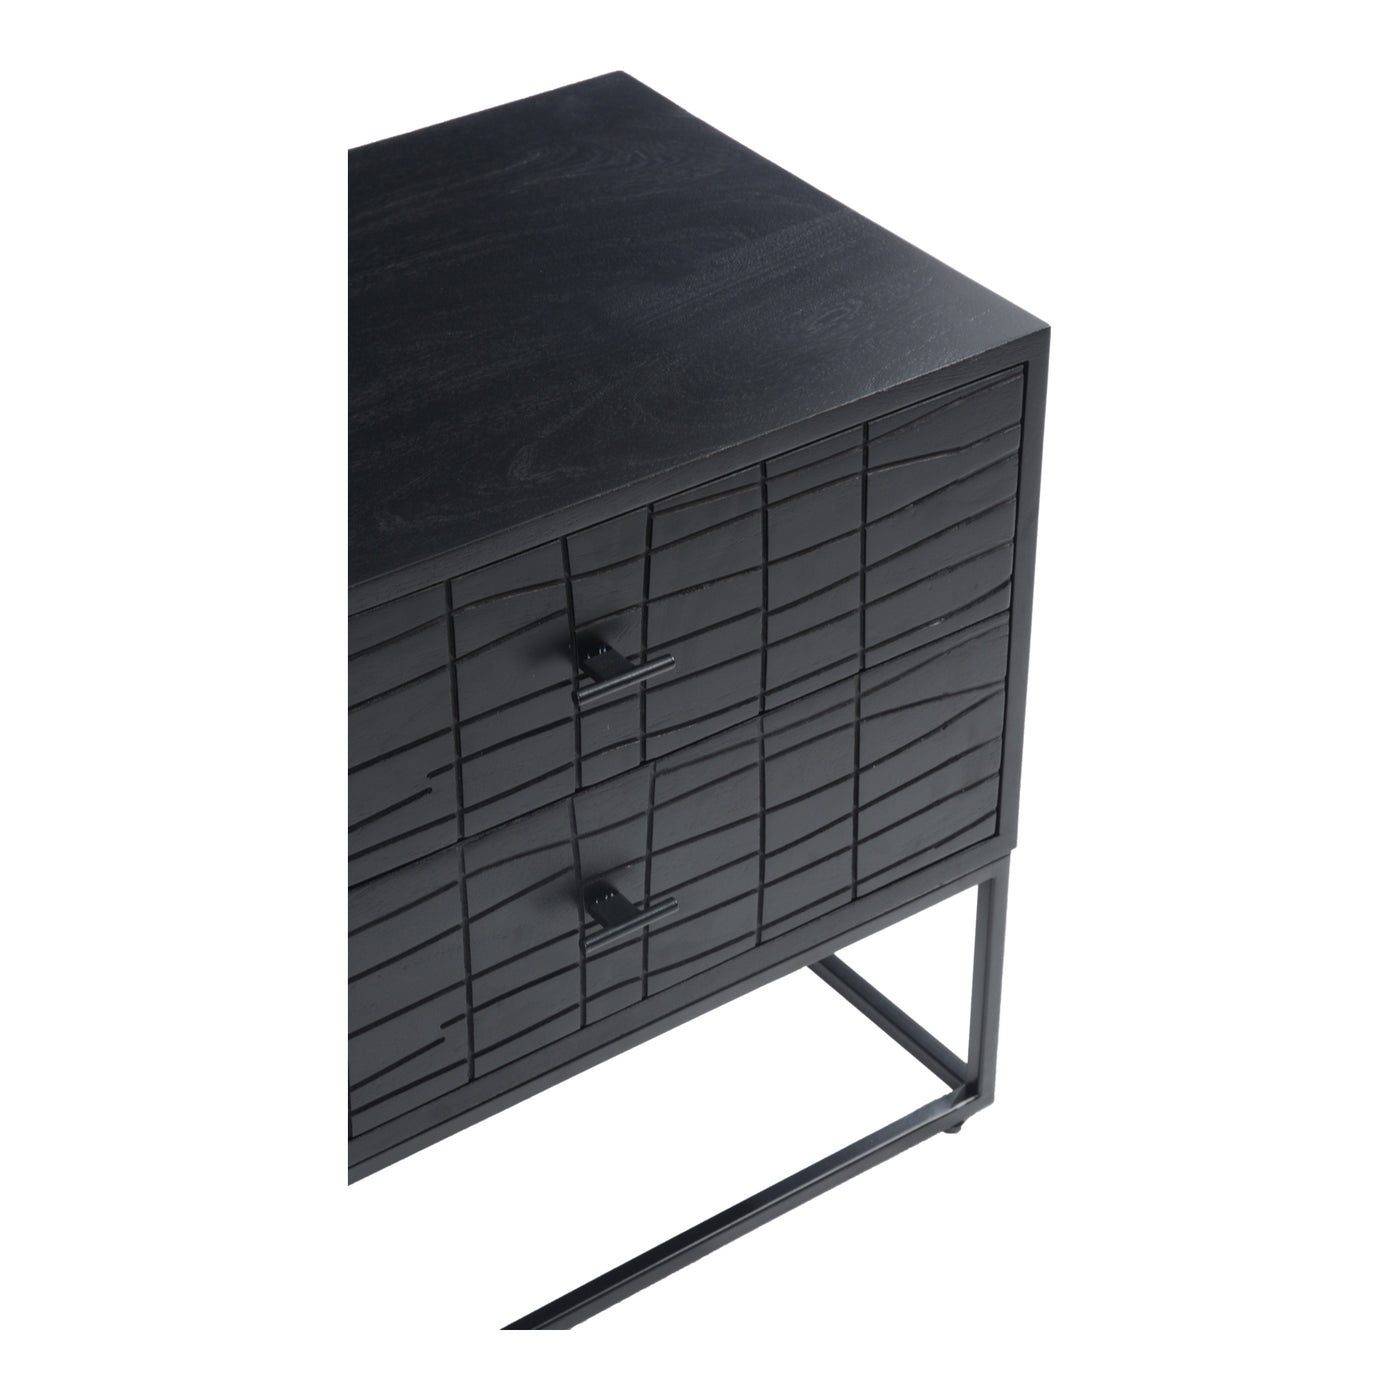 A slick black look. The Atelier nightstand features two sliding drawers with a textured detailing. A cool iron frame suppo...